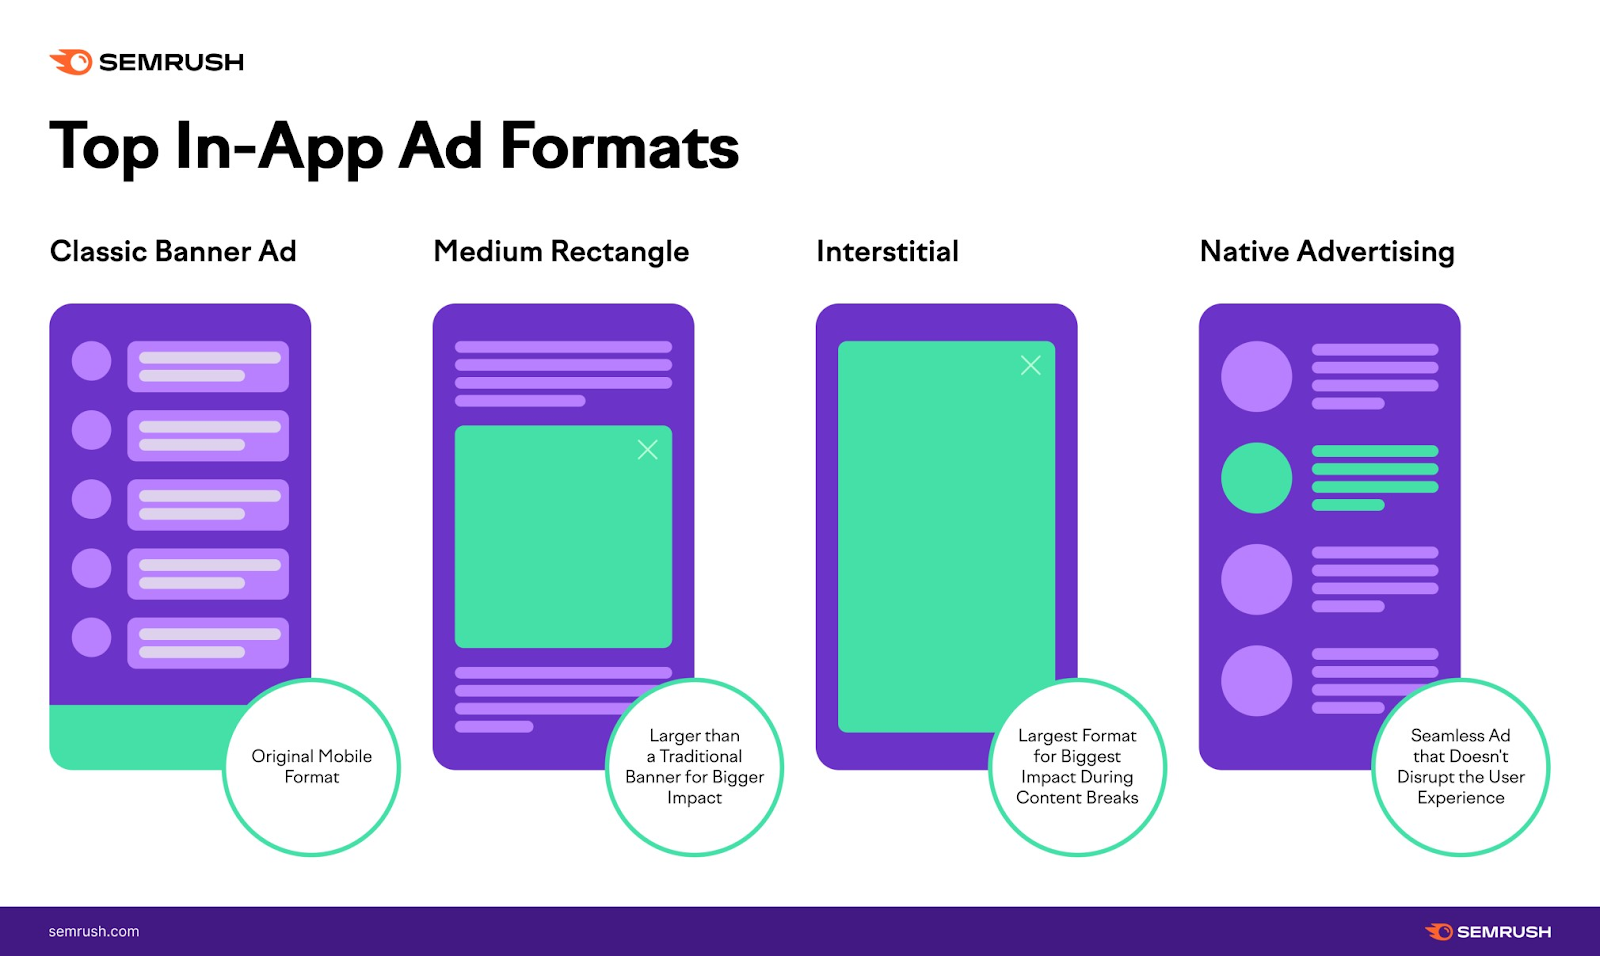 Top in-app ad formats include classic banner ads, medium rectangle, interstitial, and native advertising ads